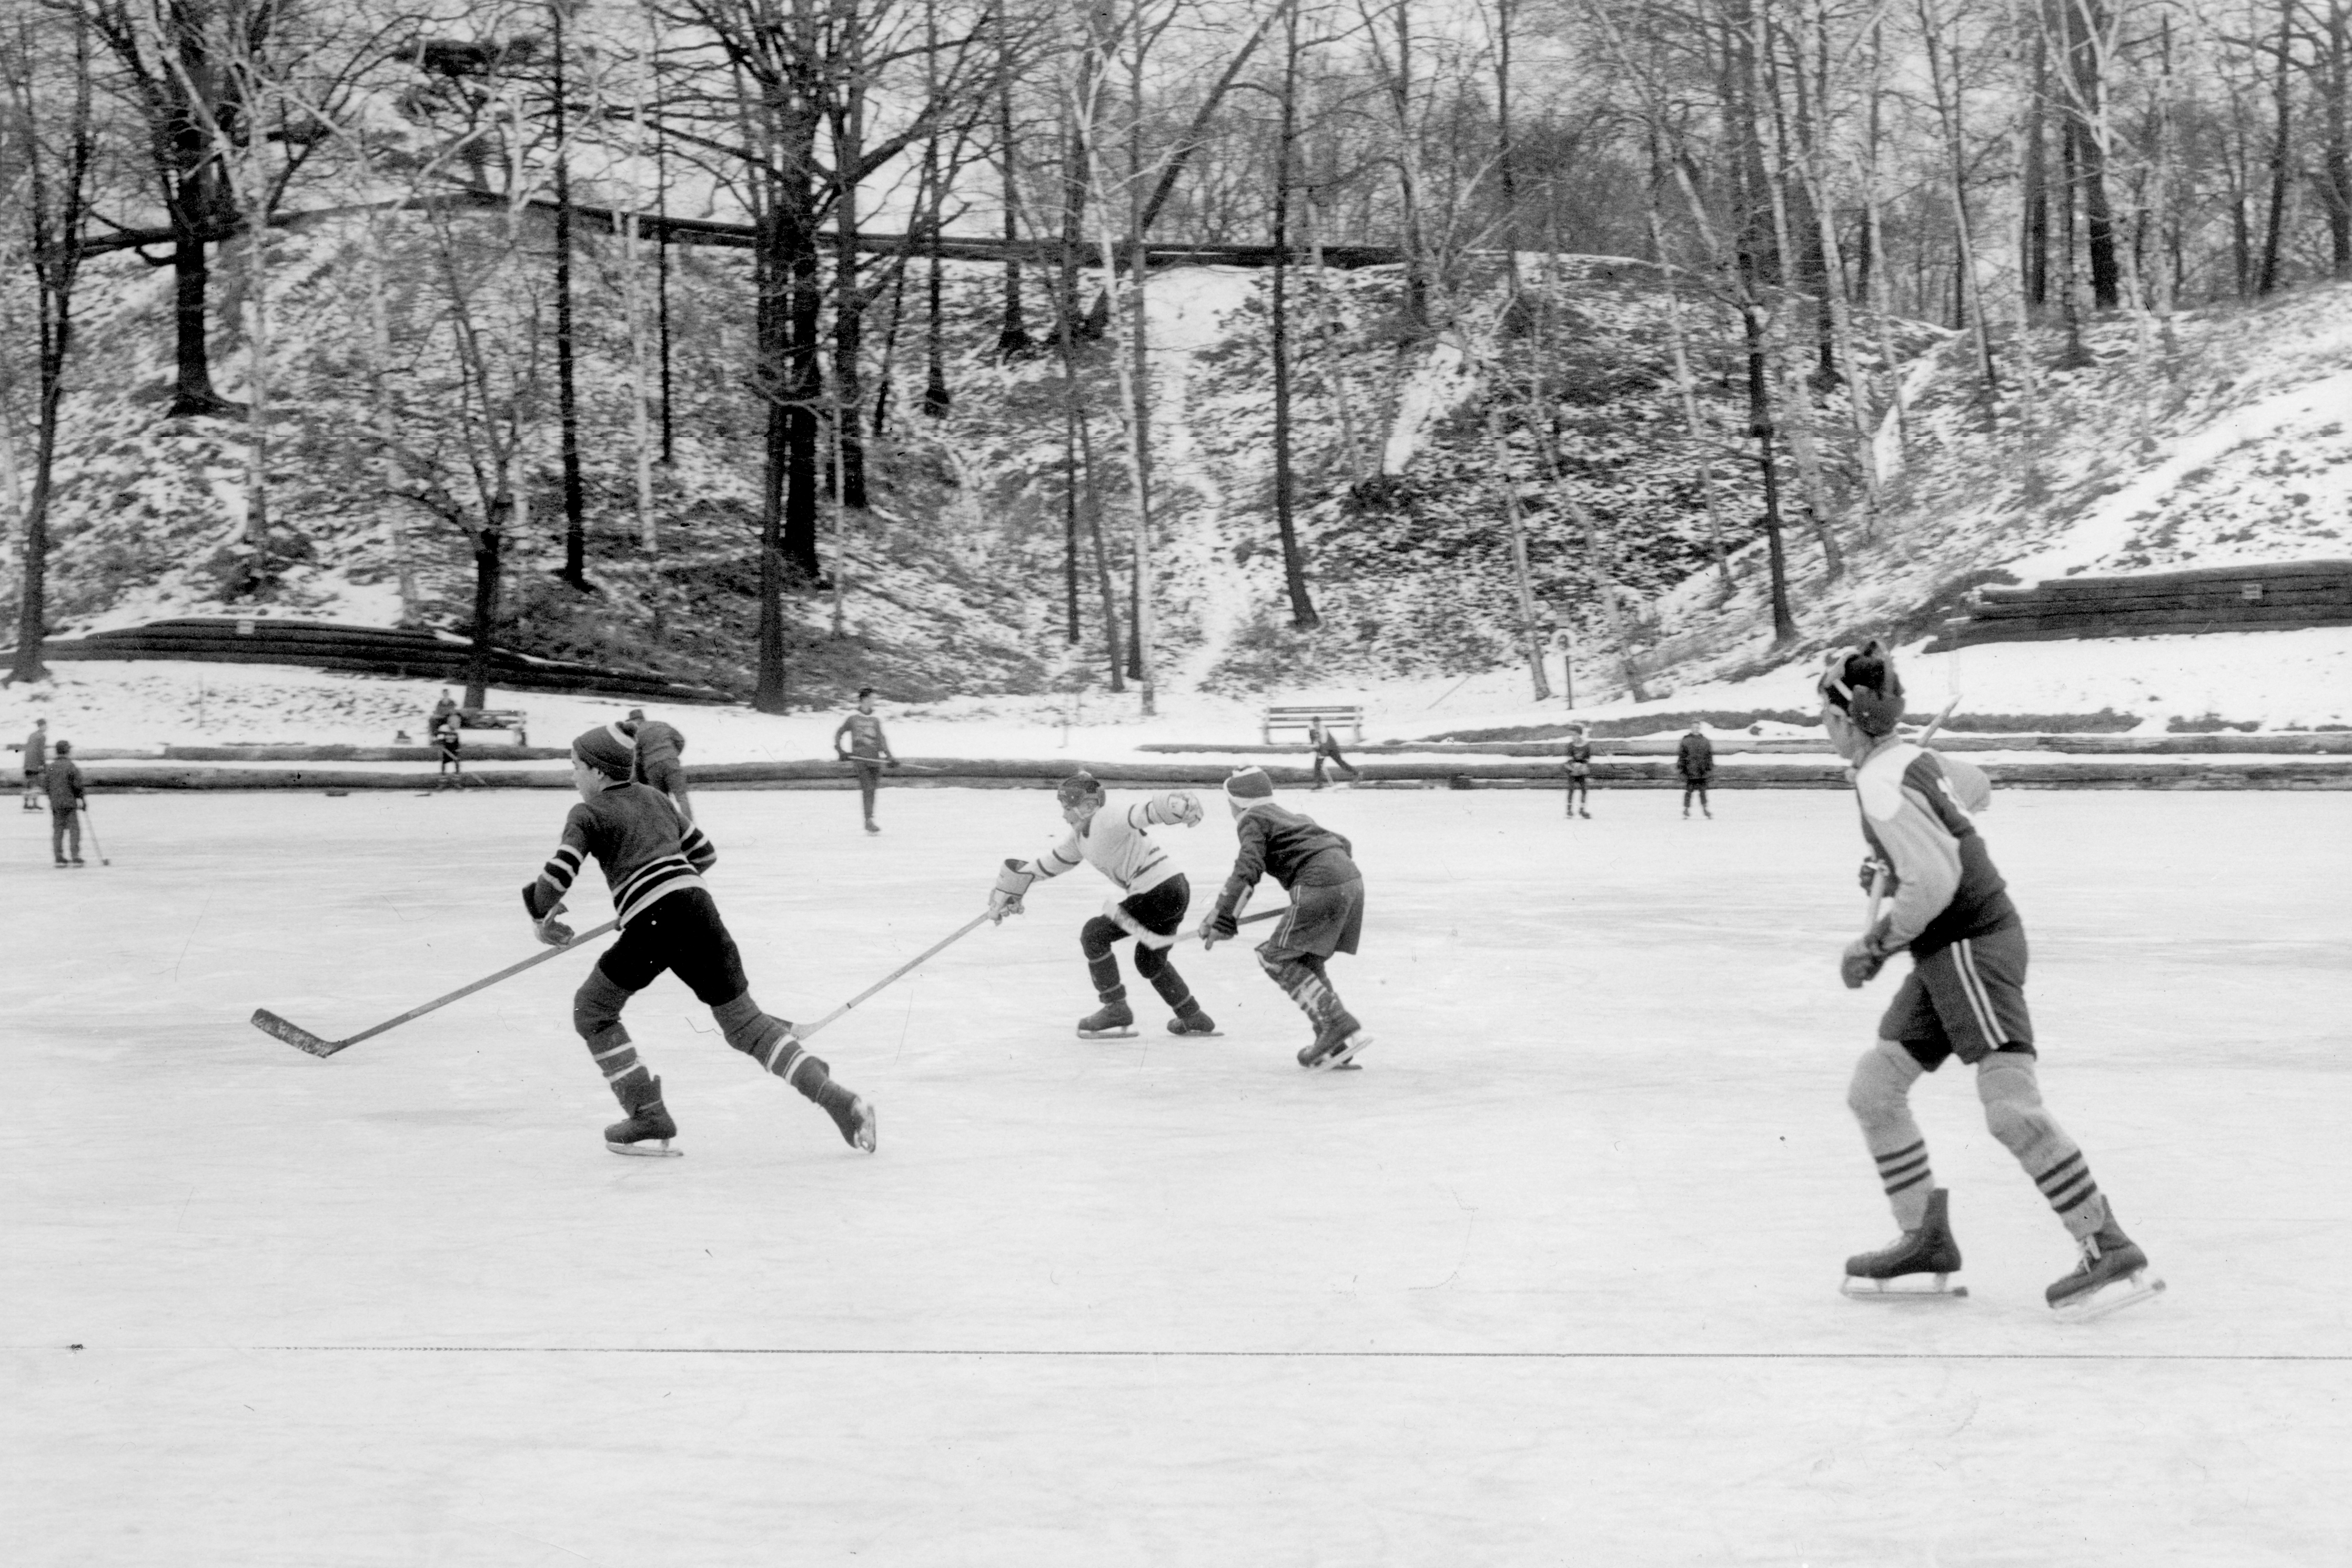 Hockey has rich tradition in Cleveland